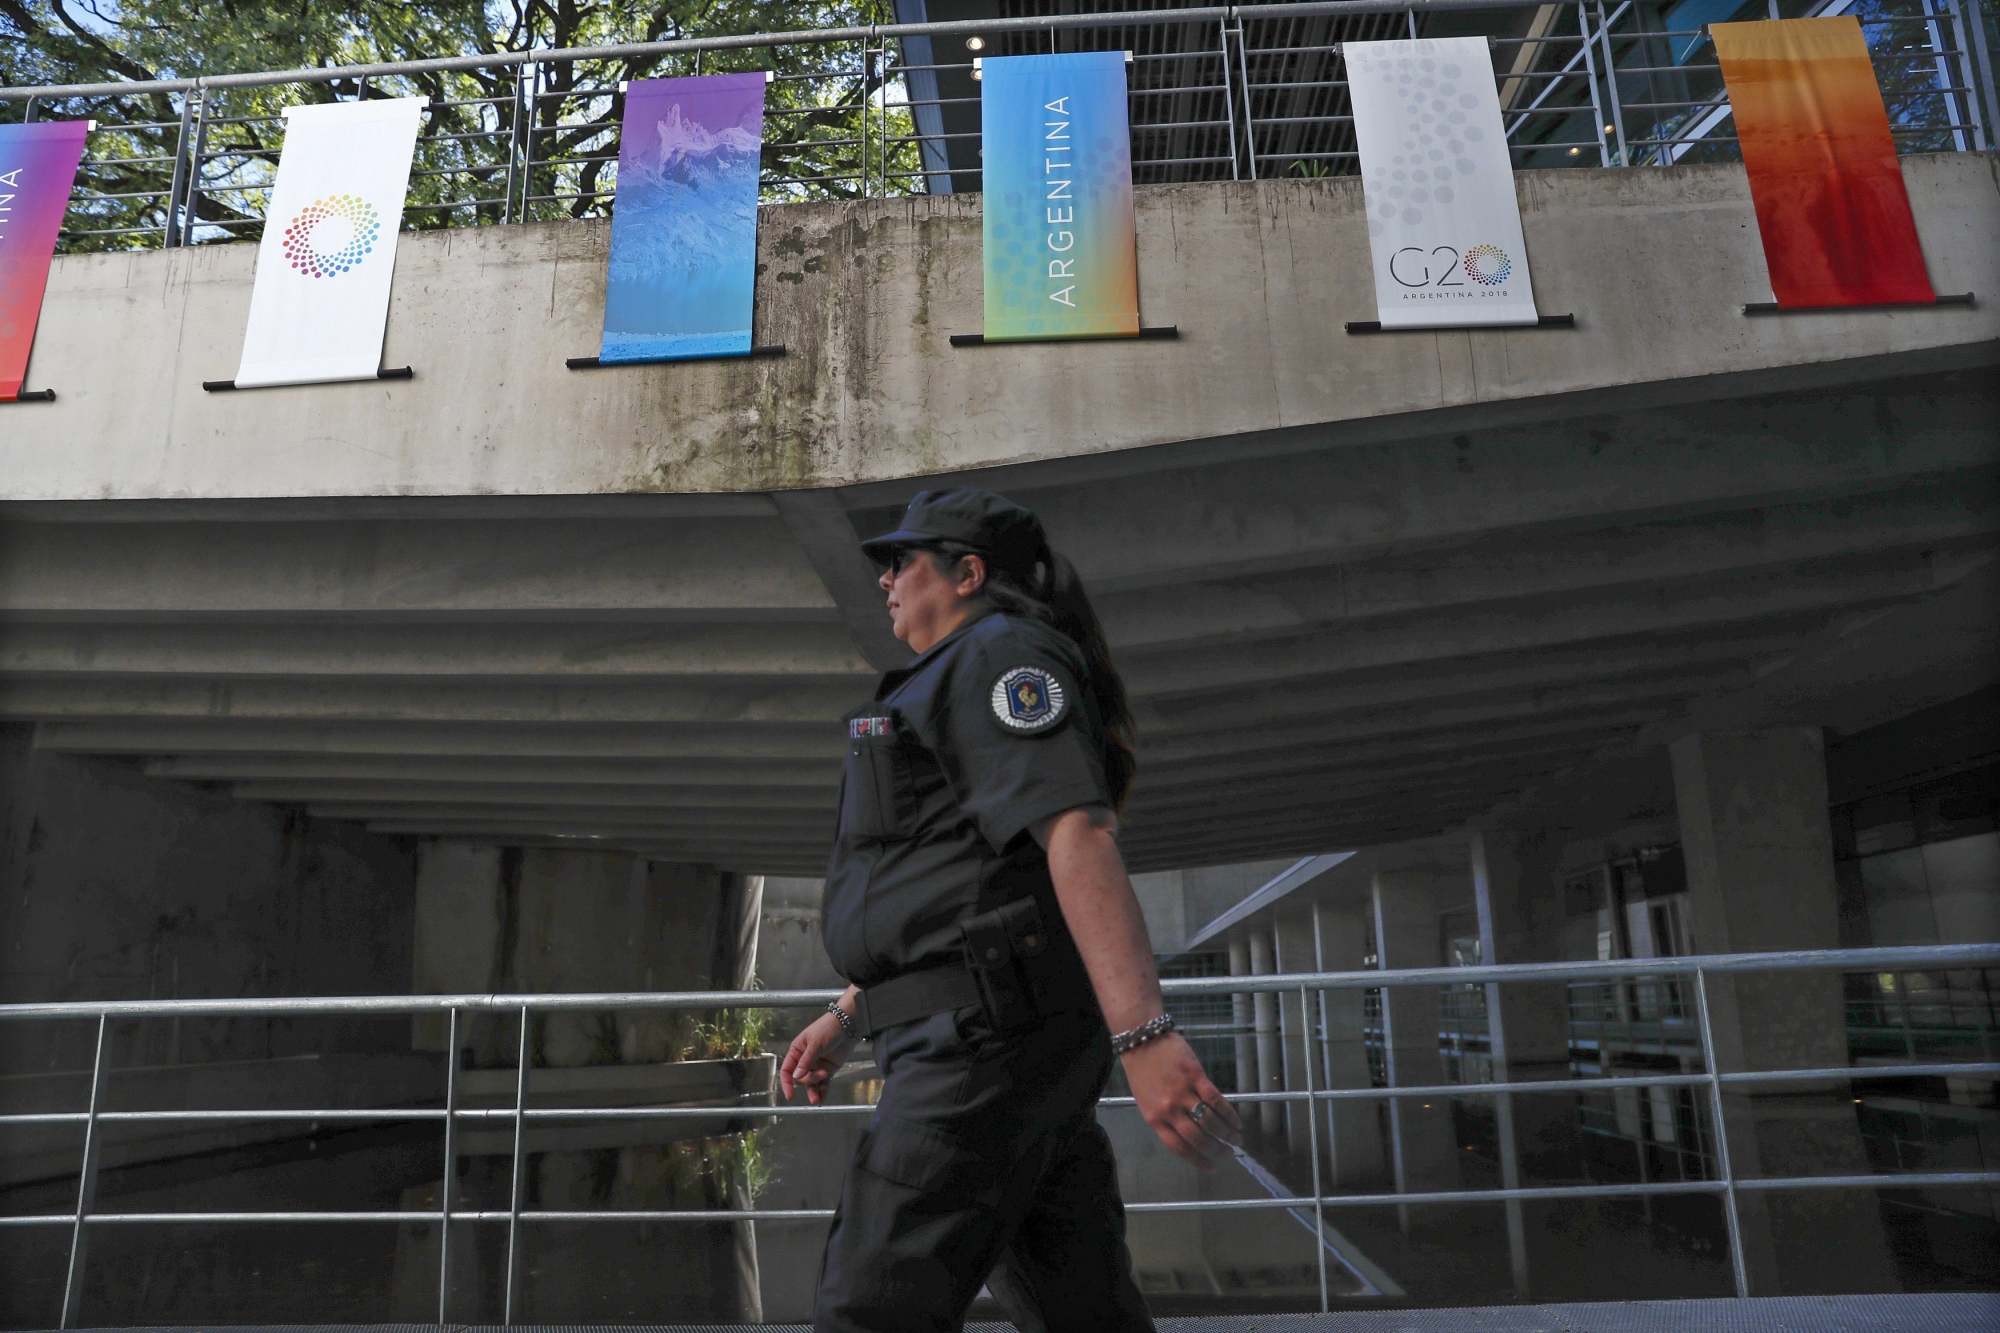 epa06614356 A member of the Argentine Gendarmerie performs surveillance work in the surroundings of the Exhibition and Convention Center where the G20 meetings take place, in Buenos Aires, Argentina, 19 March 2018. The meeting of finance ministers and presidents of central banks of the G20 began in Buenos Aires on 19 March 2018 with a private meeting in which economic leaders are expected to address the future of work and the global tax system, with the ghosts of protectionism freshly revived.  EPA/DAVID FERNANDEZ ARGENTINA G20 FINANCE